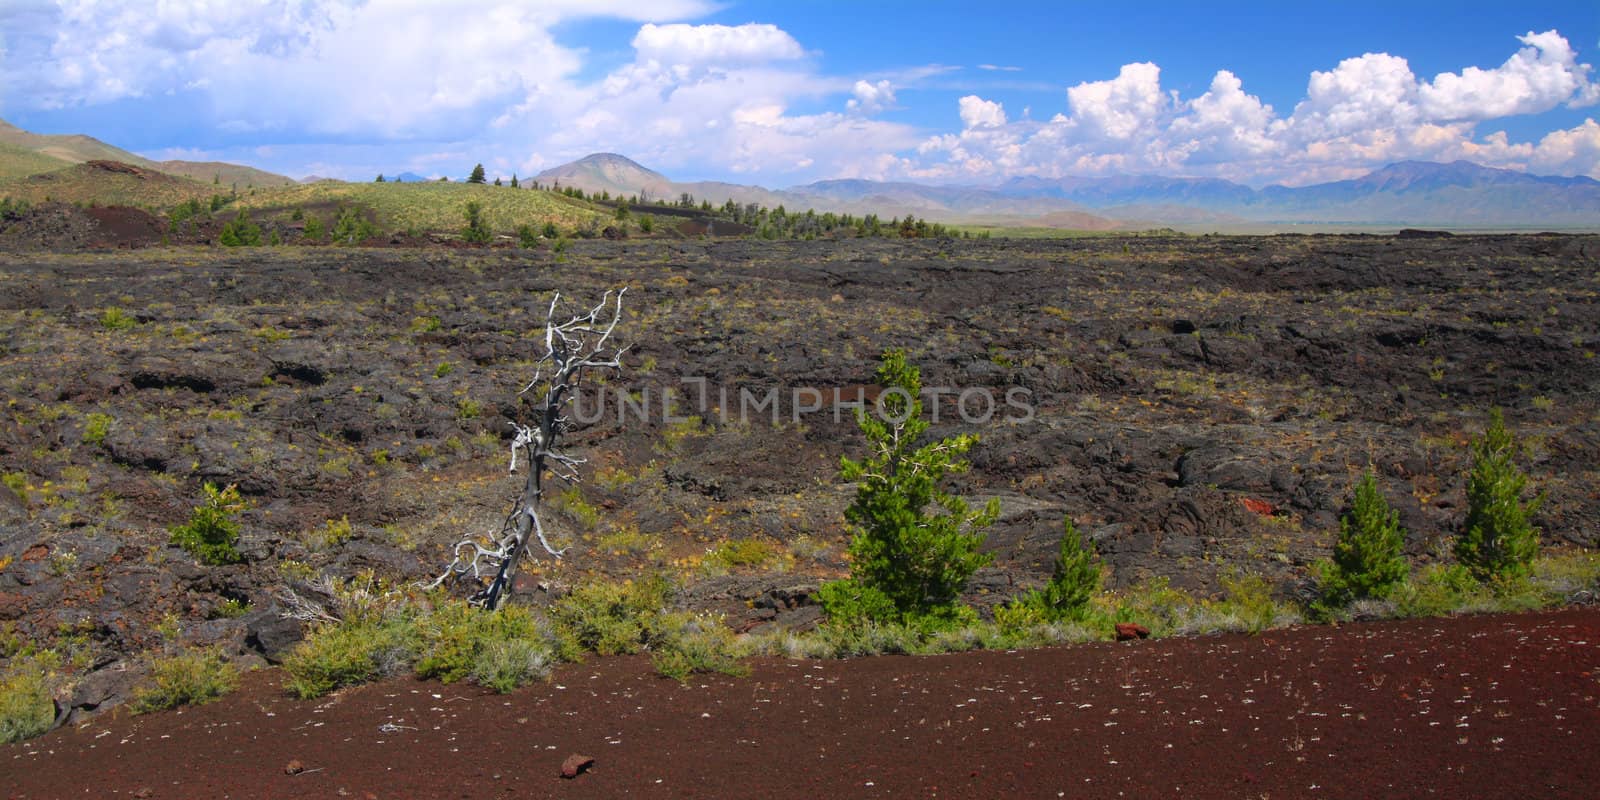 Amazing volcanic landscape at Craters of the Moon National Monument of Idaho.